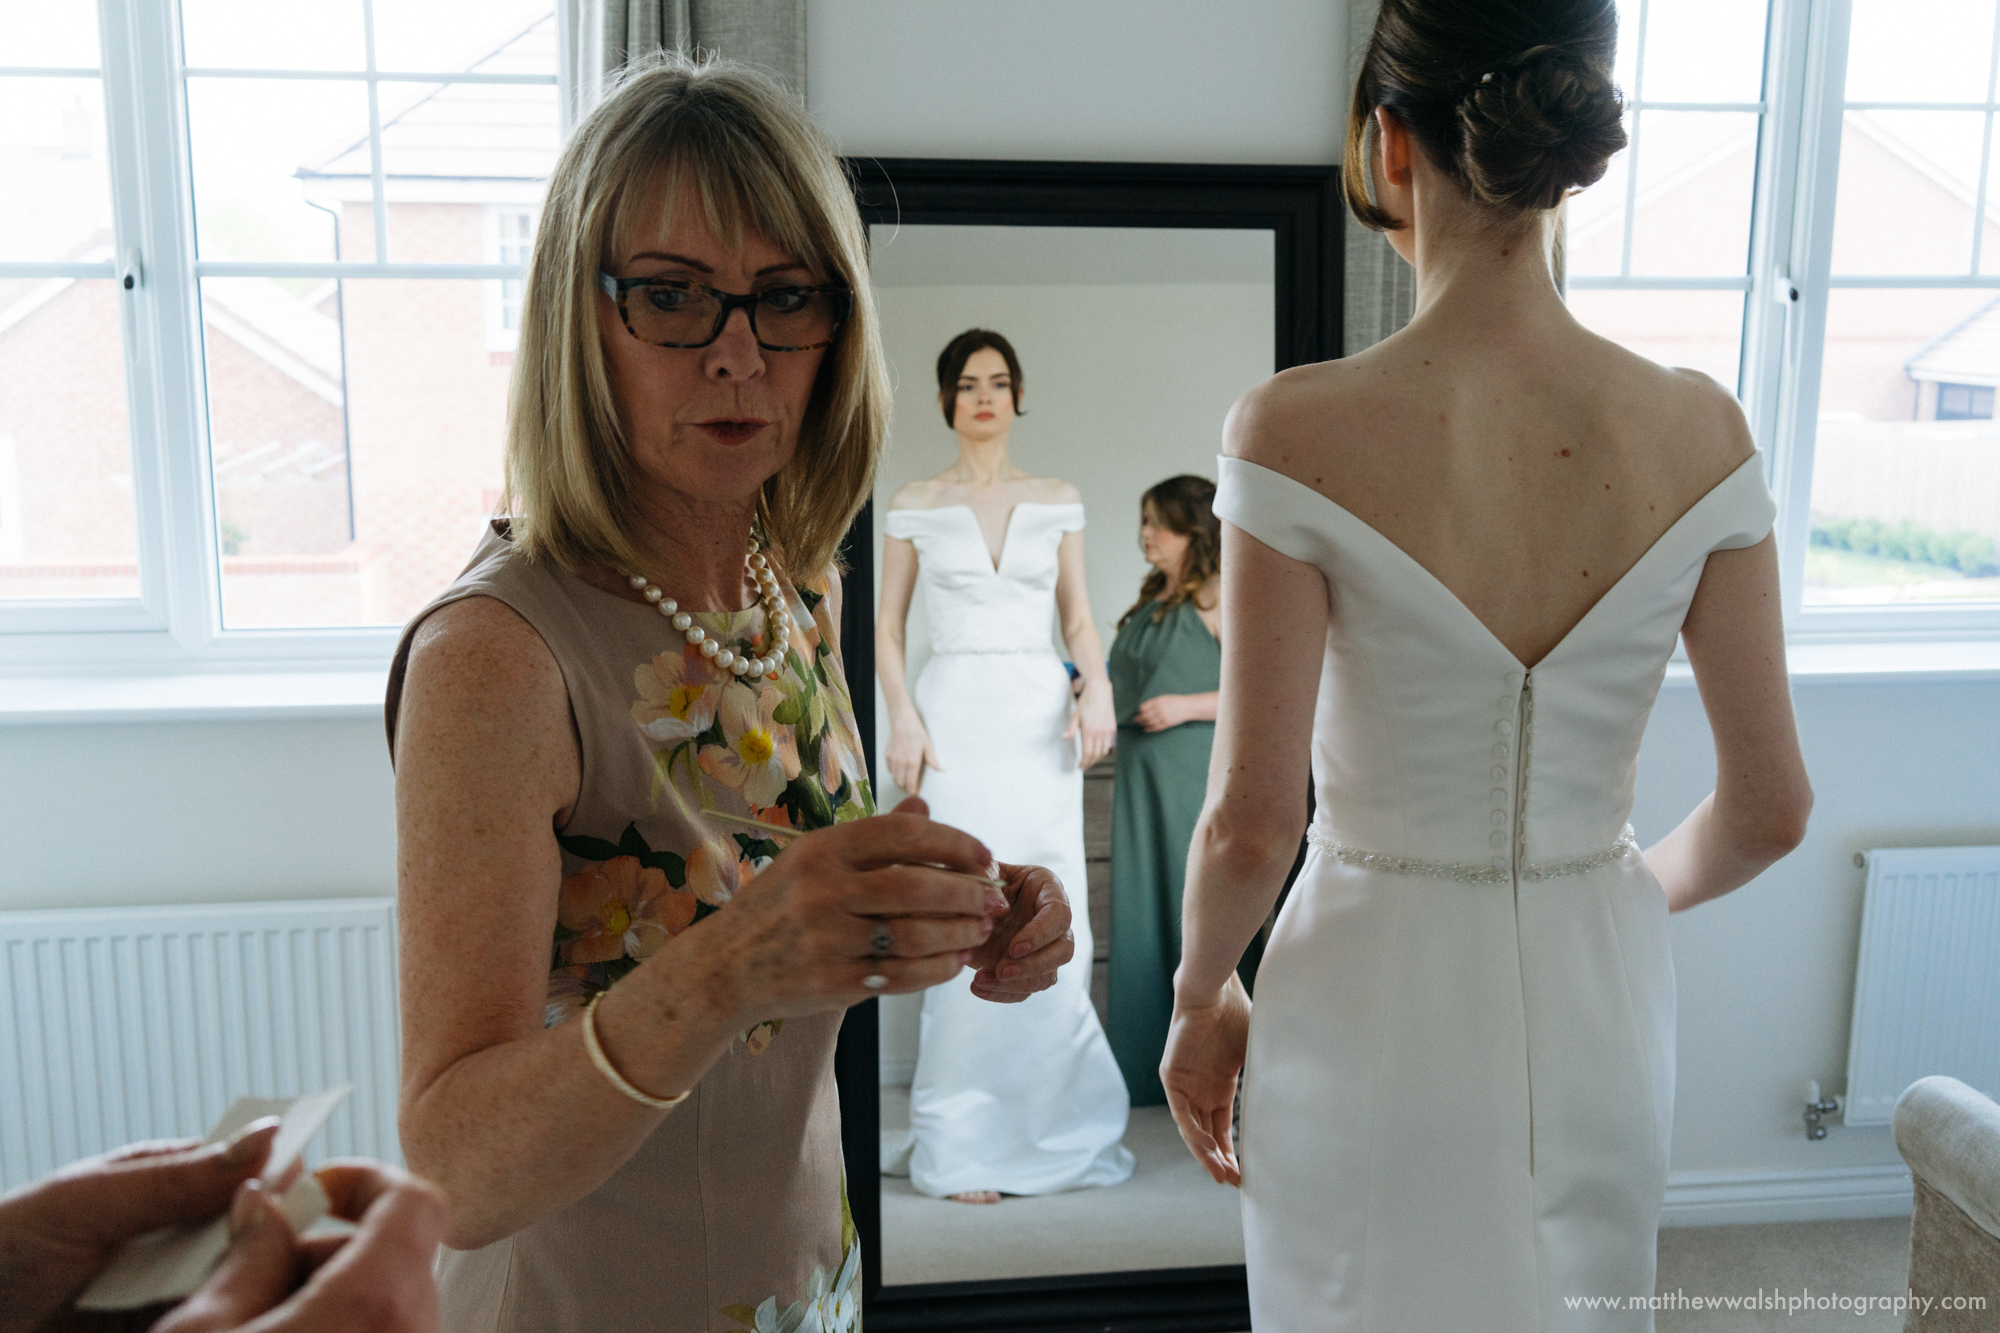 The mother of the bride helps her daughter to put her dress on in keeping with tradition 